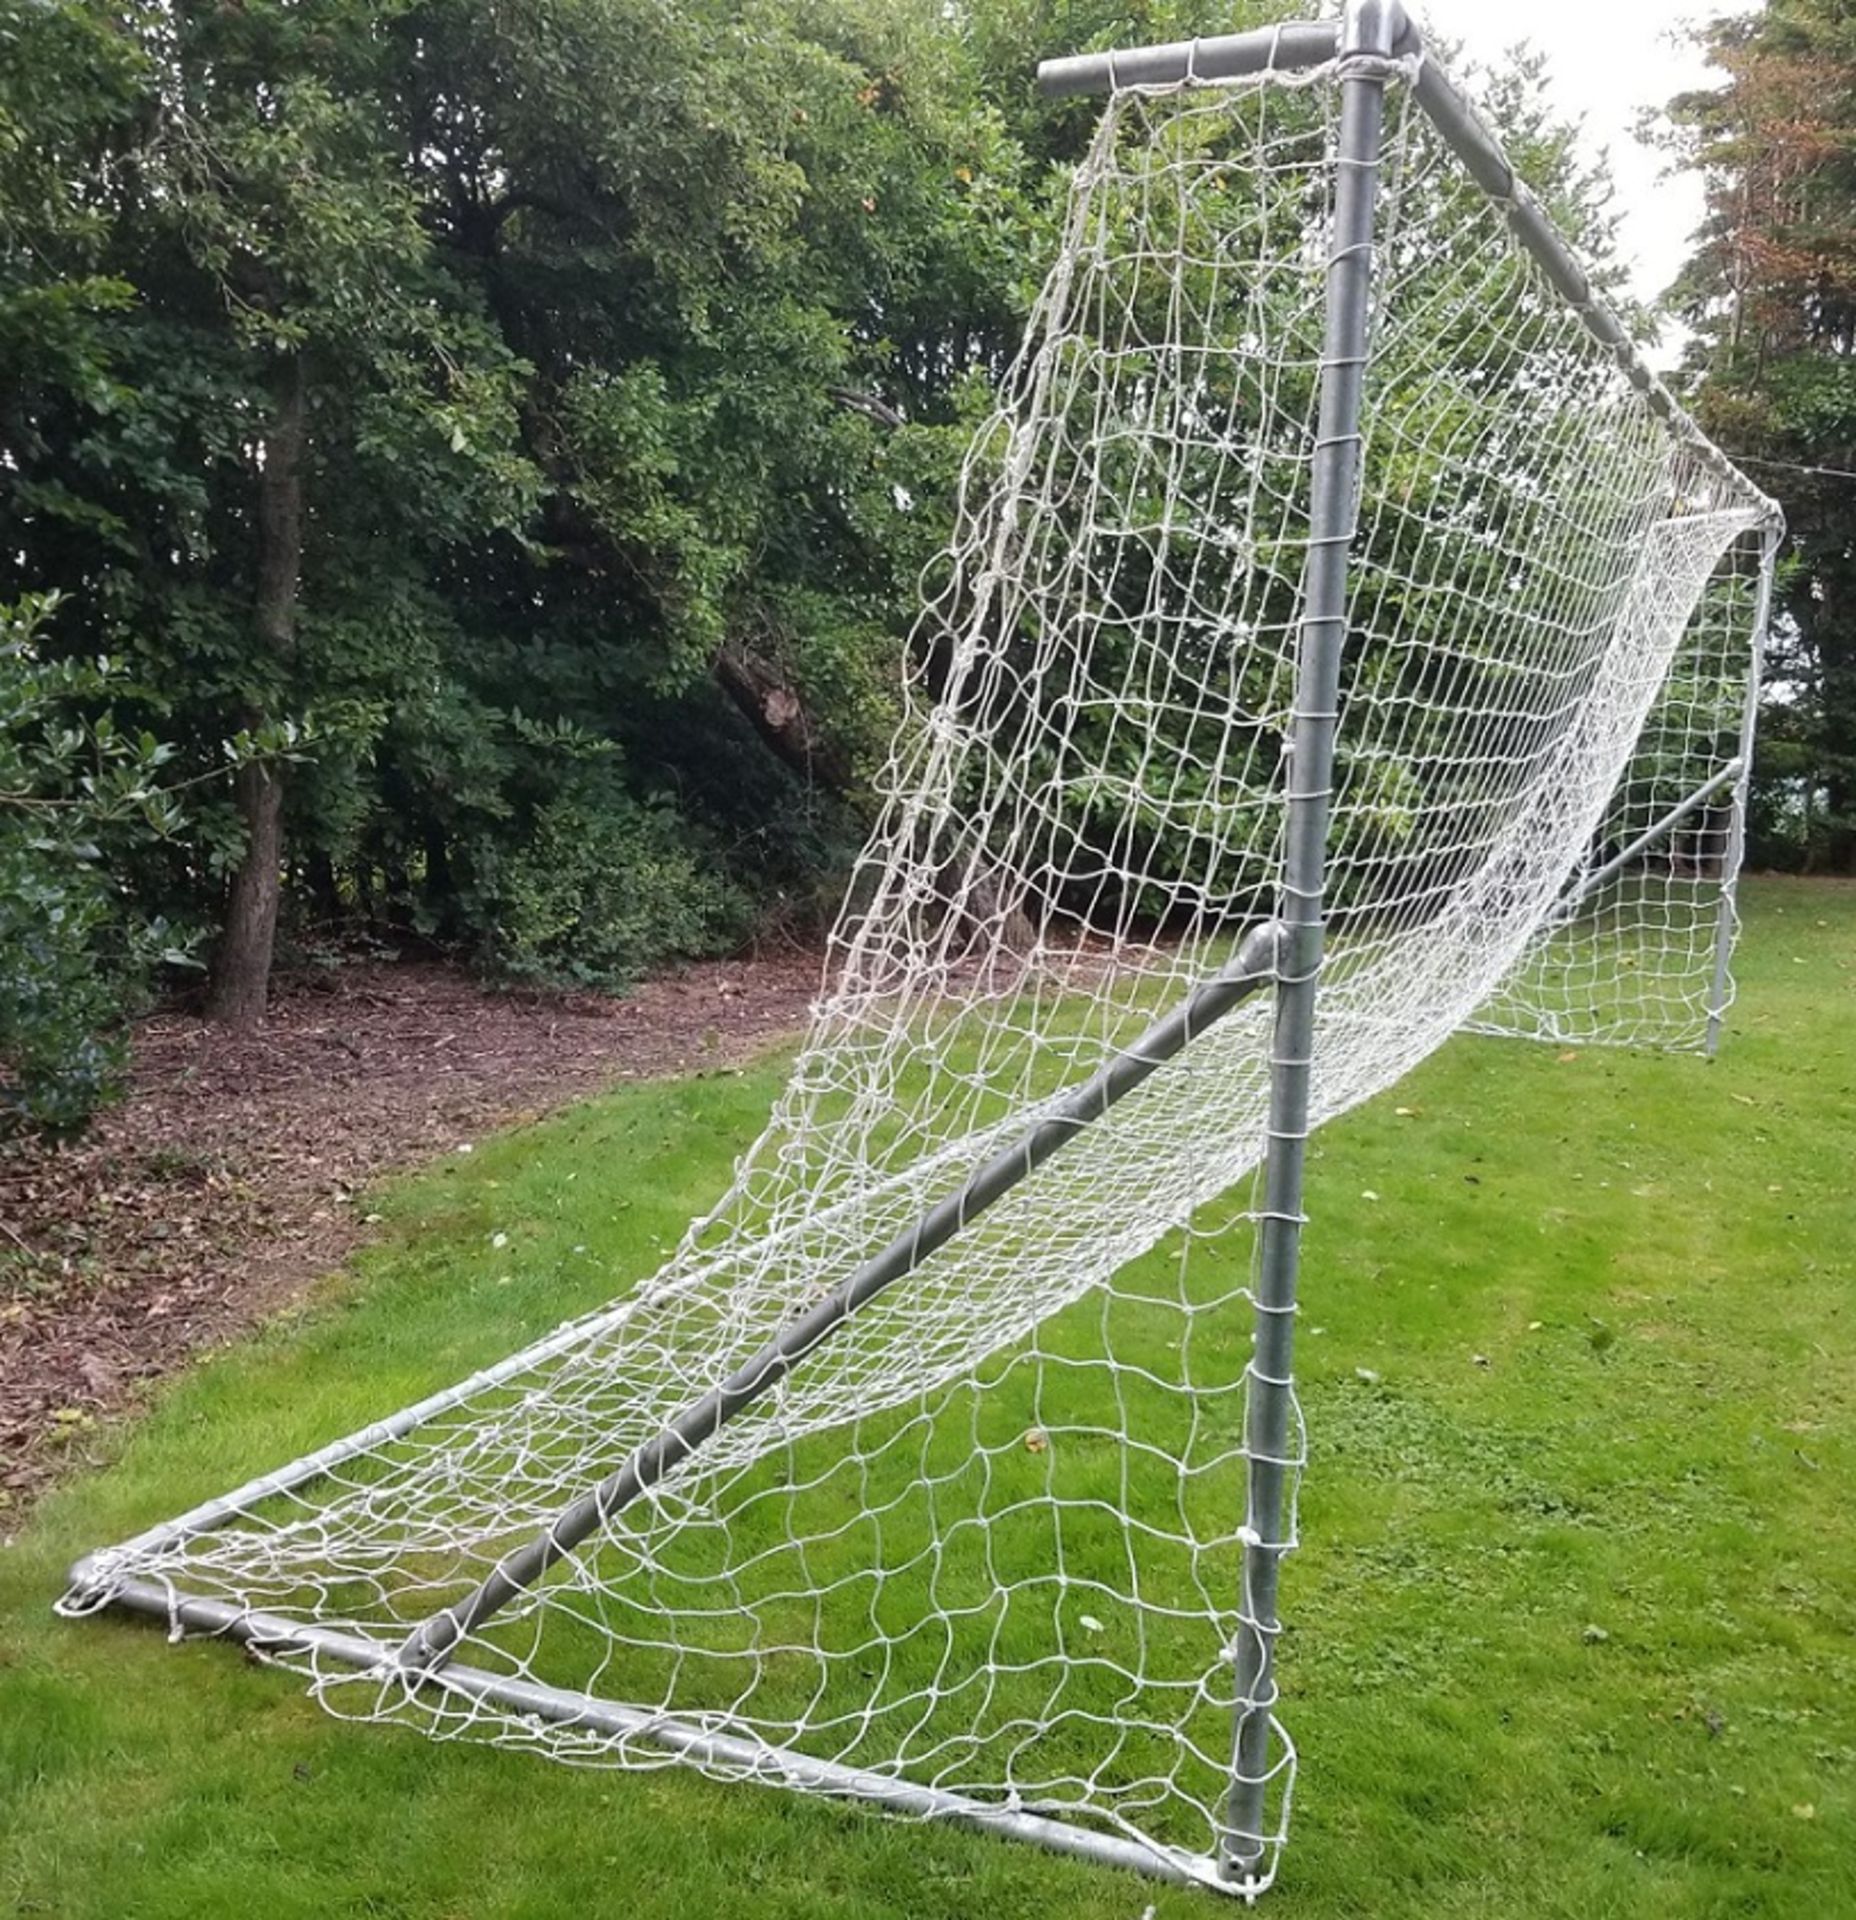 Full size heavy weight football goal 24ft x 8ft with professional net - Image 3 of 8